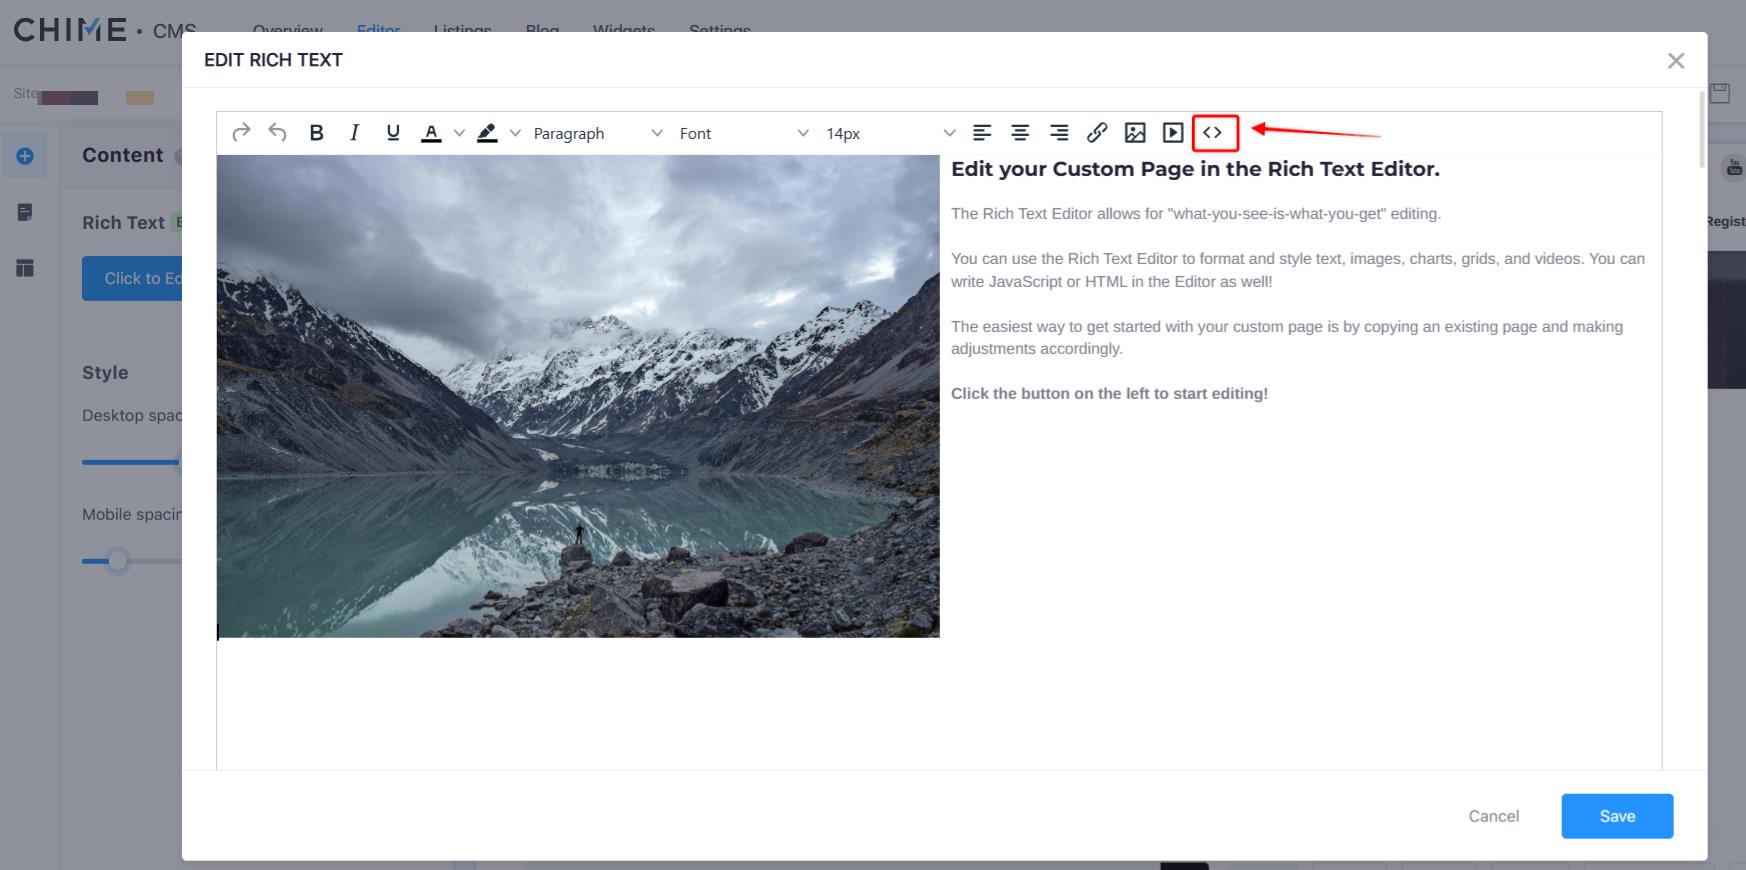 Page Editor _ CMS and 4 more pages - [InPrivate] - Microsoft_ Edge 2023-09-06 at 6.46.57 AM.jpeg